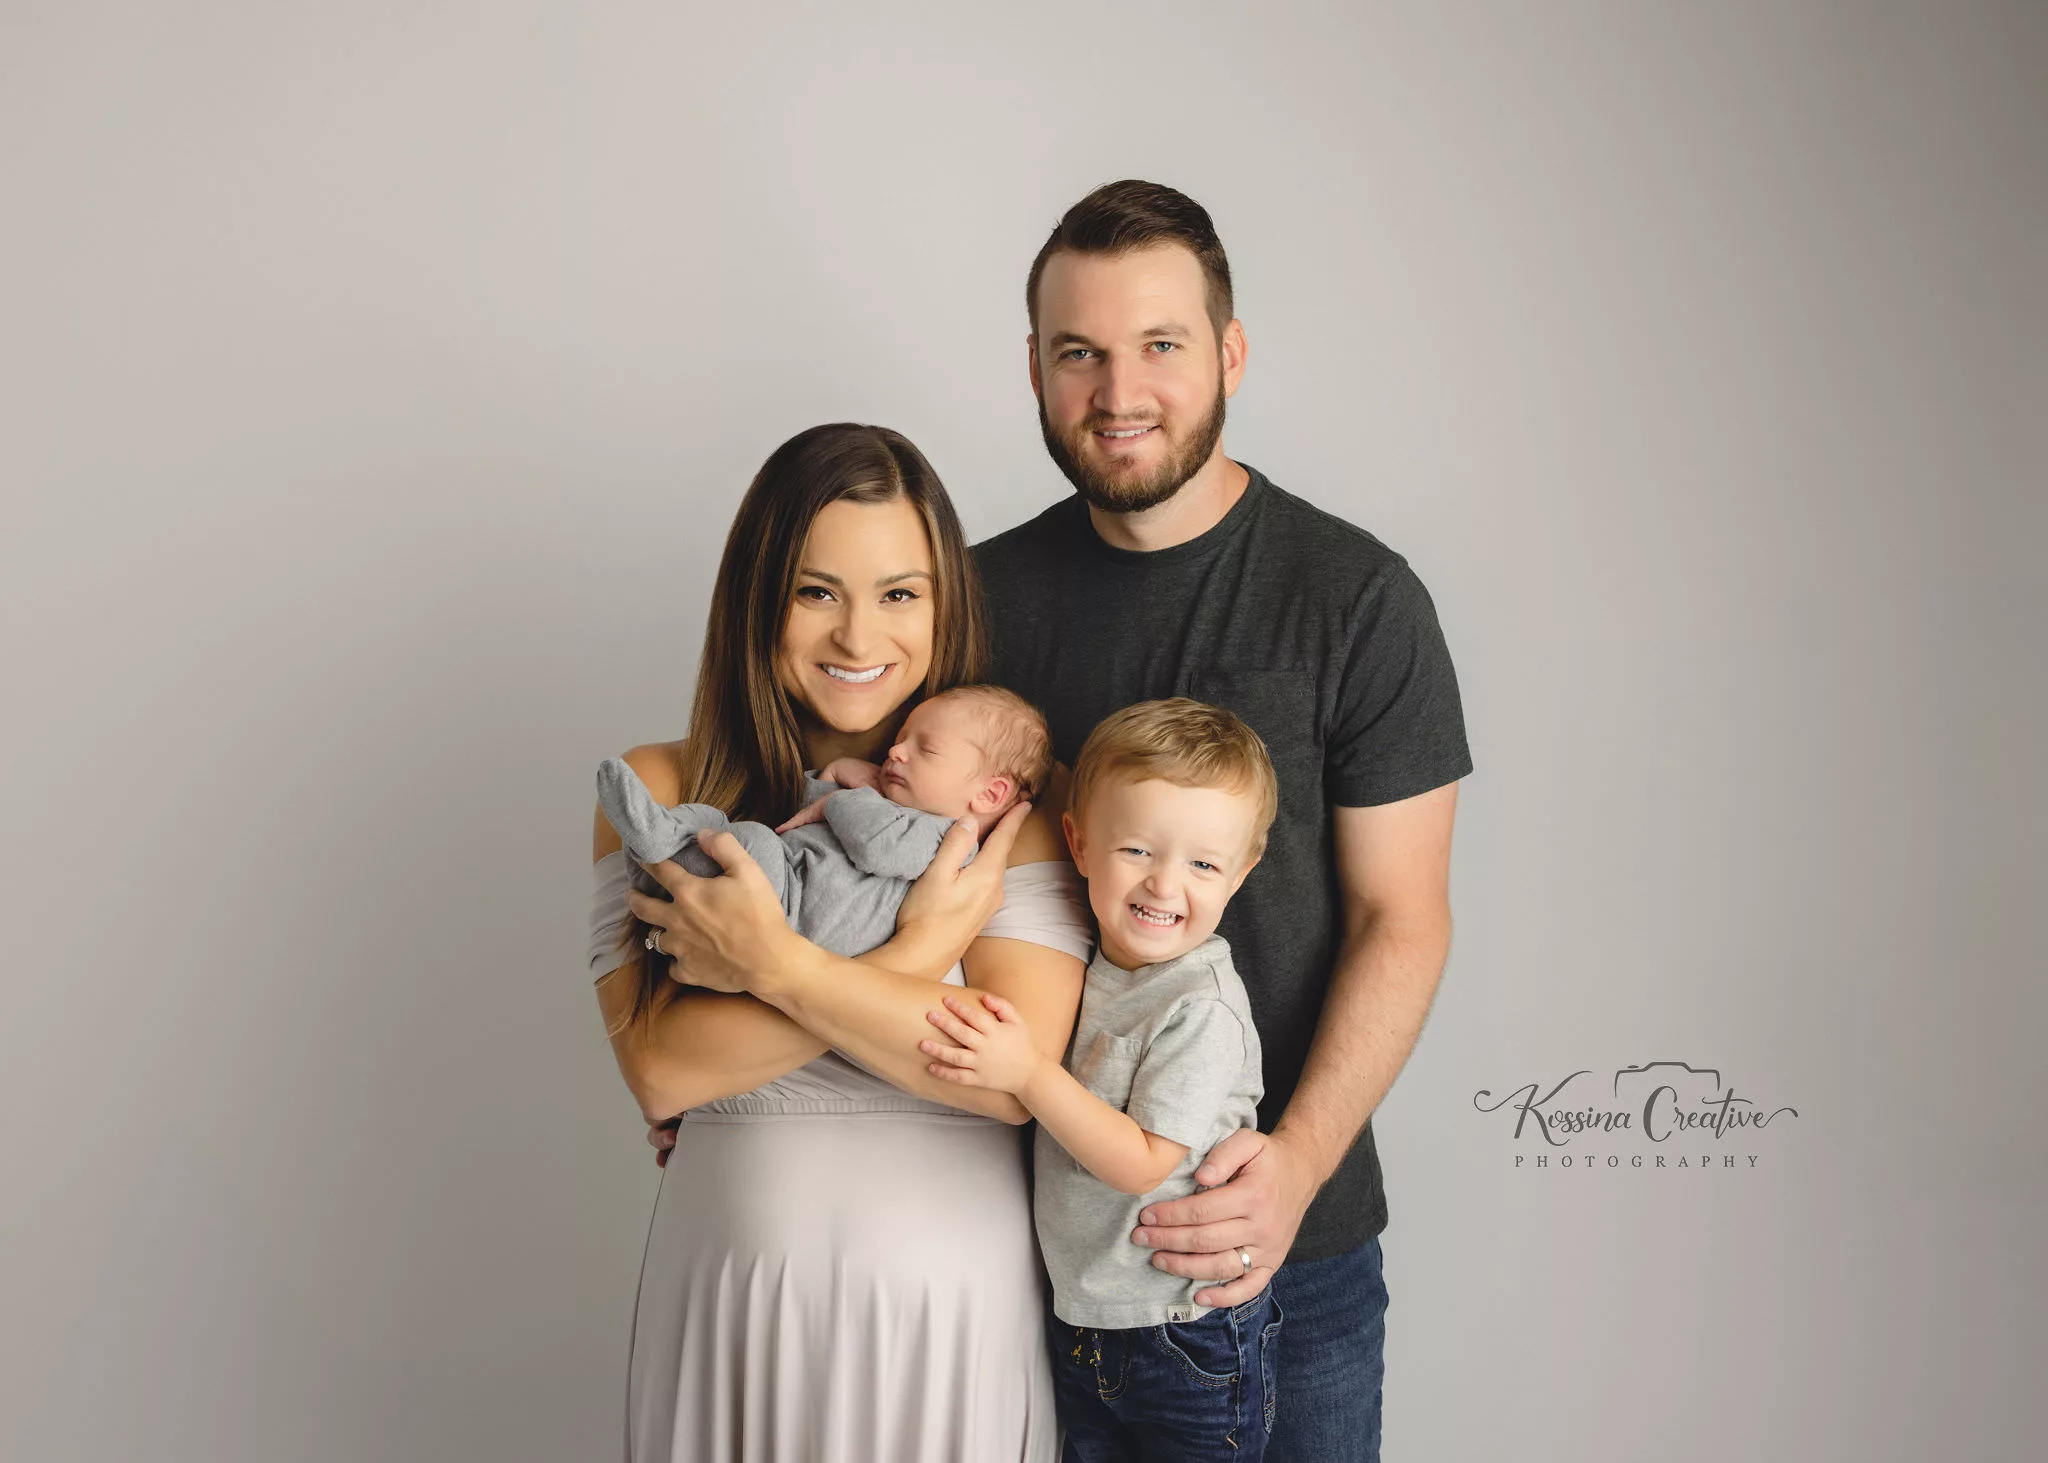 Orlando Family Newborn Photographer Baby Kid Photo studio family off our grey big brother little baby mom dad